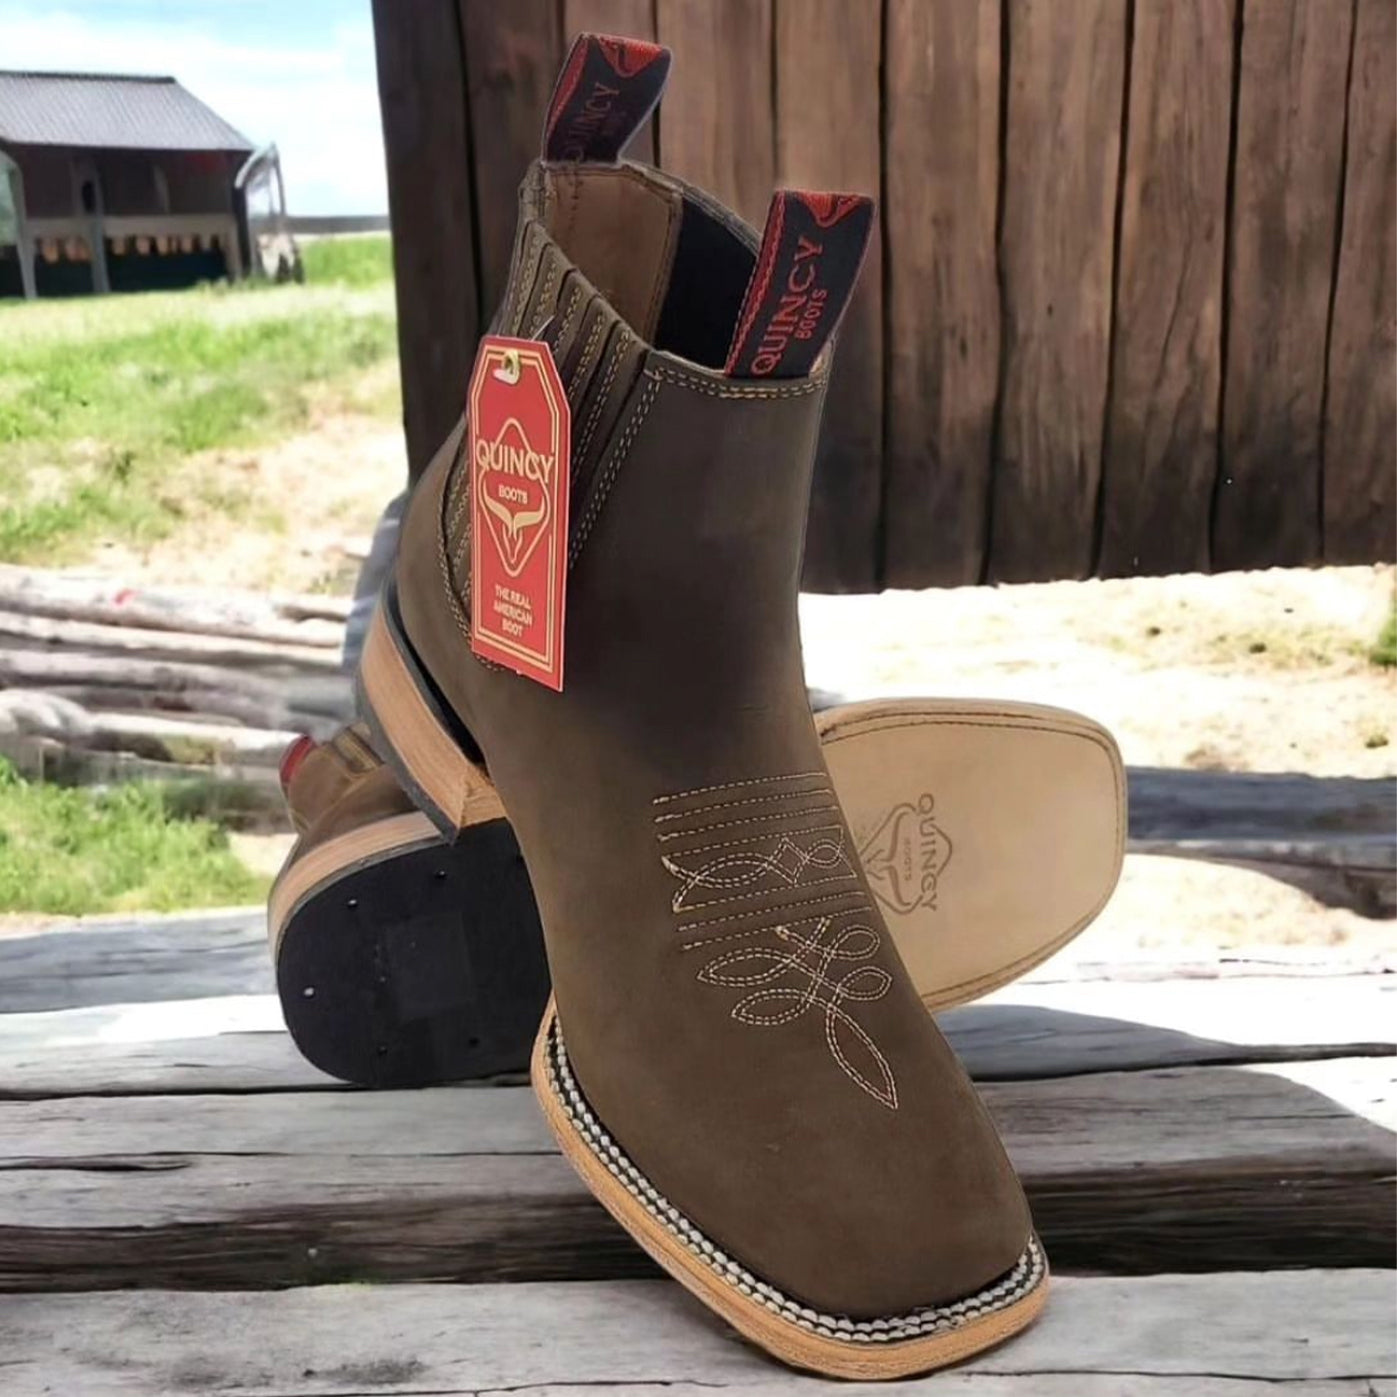 Quincy Chocolate Brown Short Cowboy Boots